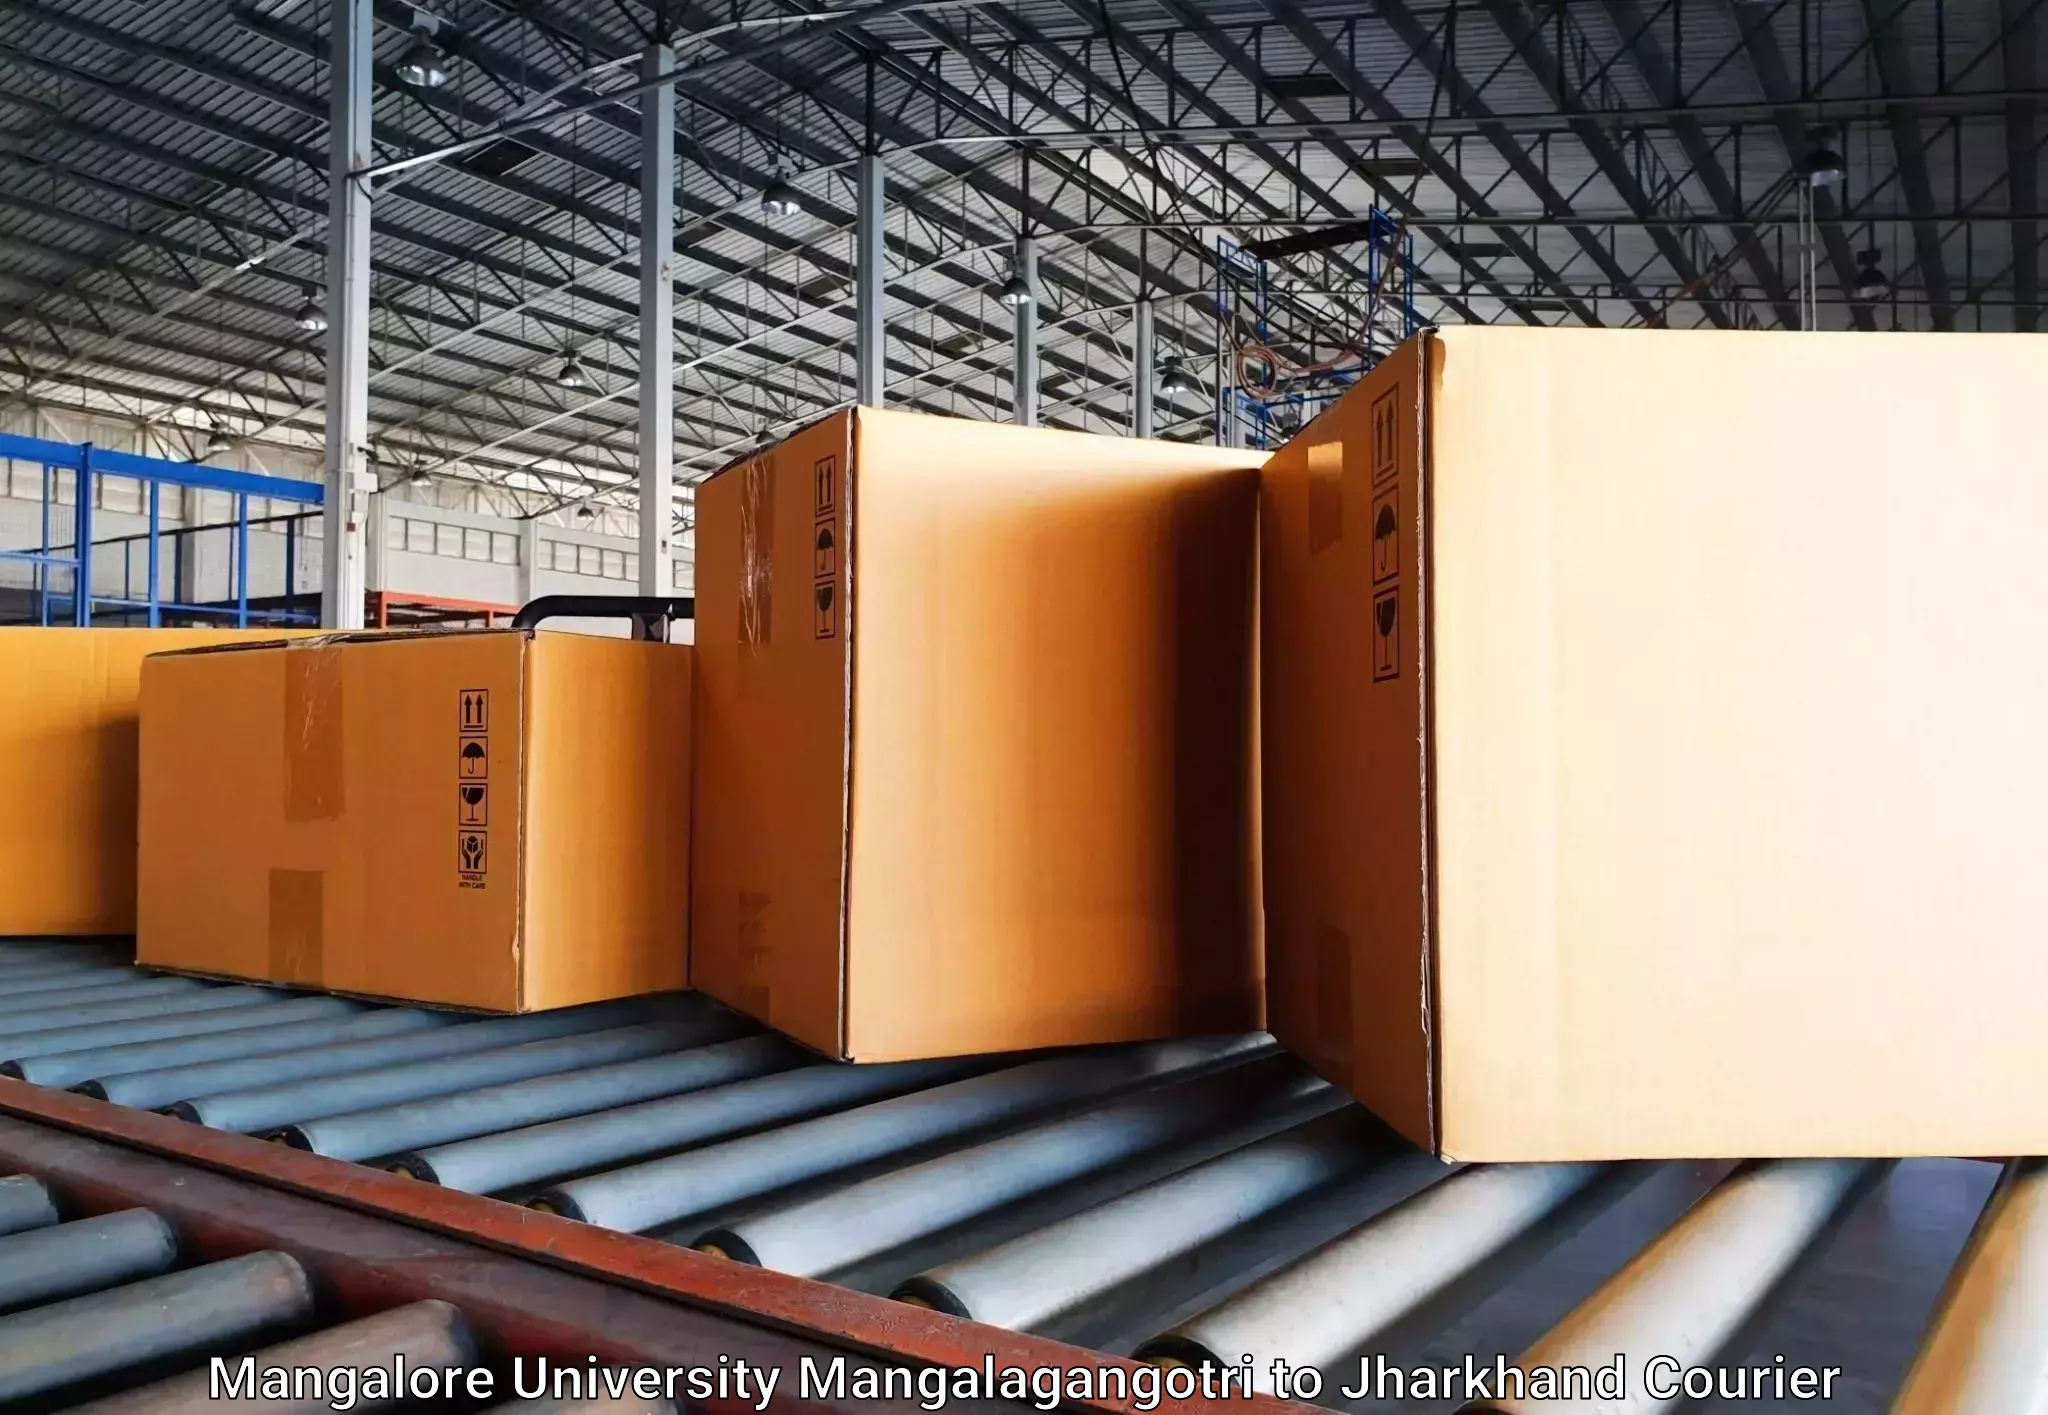 Luggage delivery system in Mangalore University Mangalagangotri to Chouparan